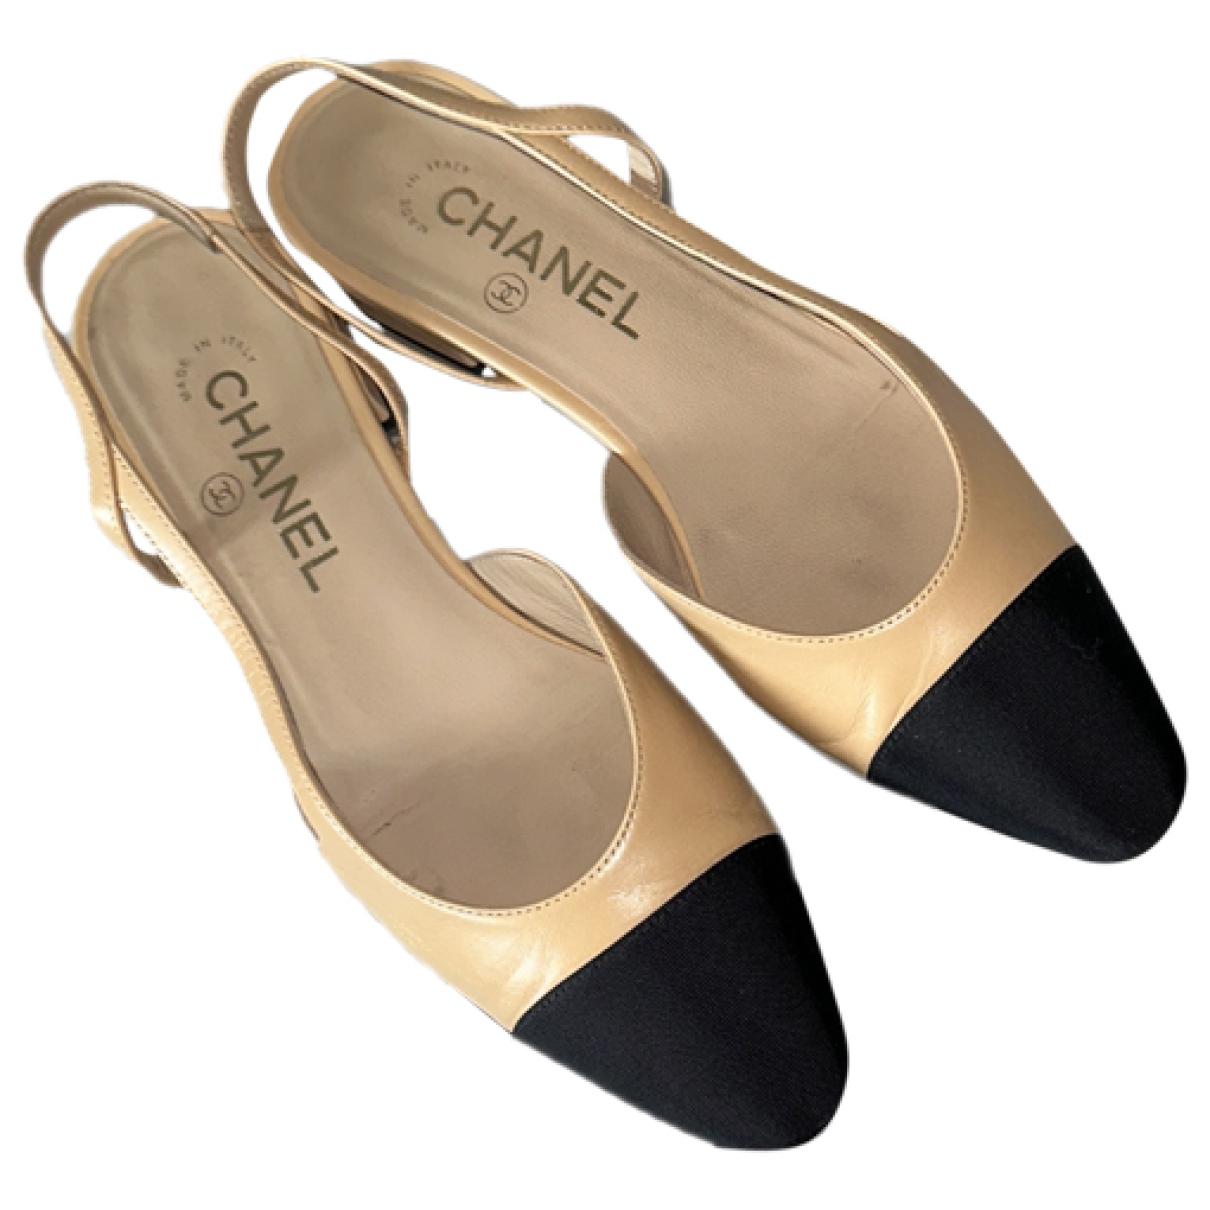 Chanel - Authenticated Slingback Ballet Flats - Leather Black Plain for Women, Very Good Condition